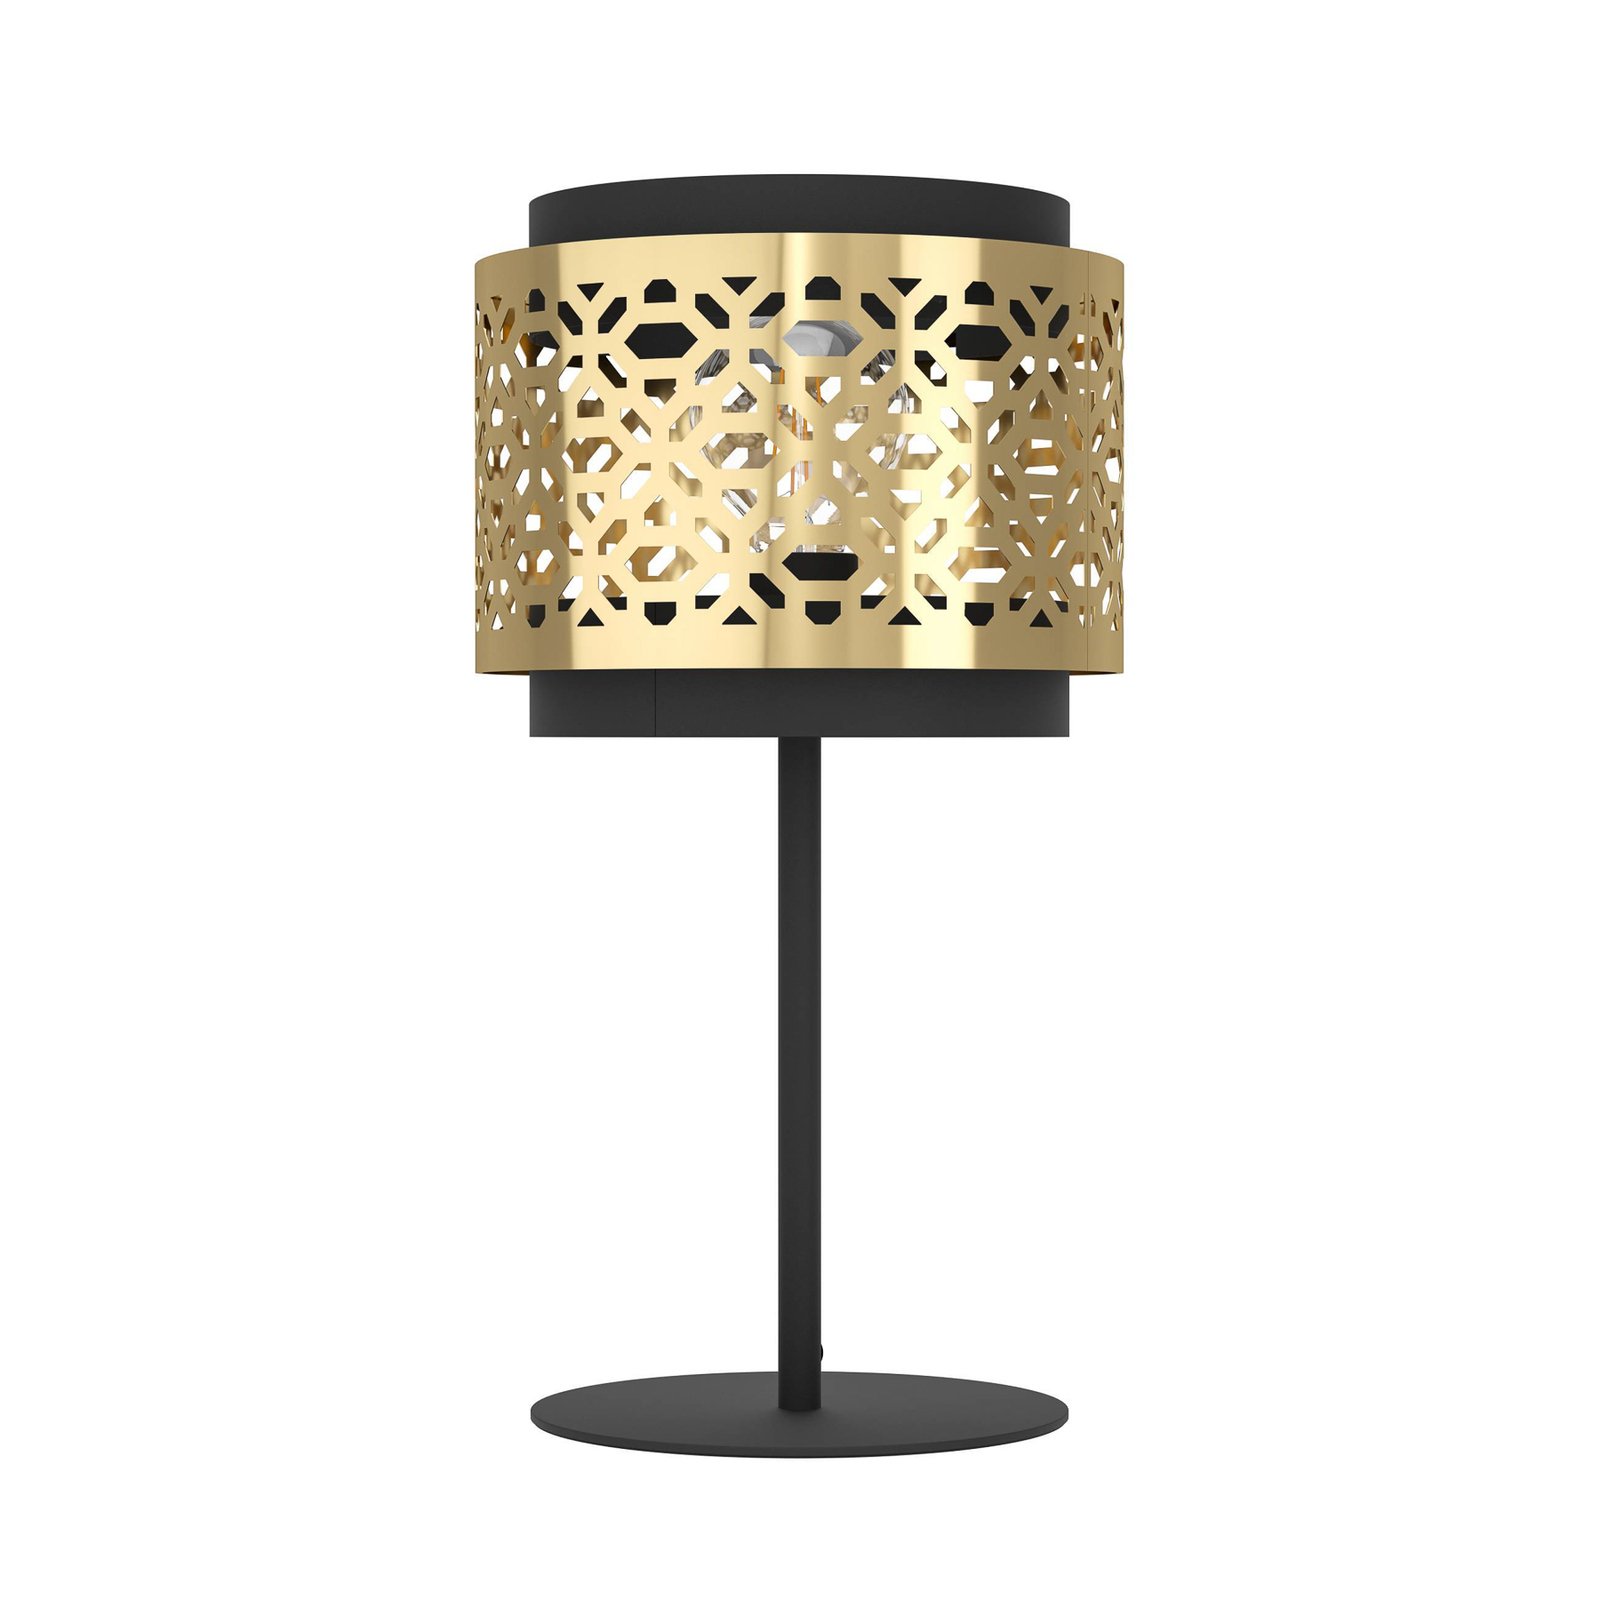 Sandbach table lamp in black and brass